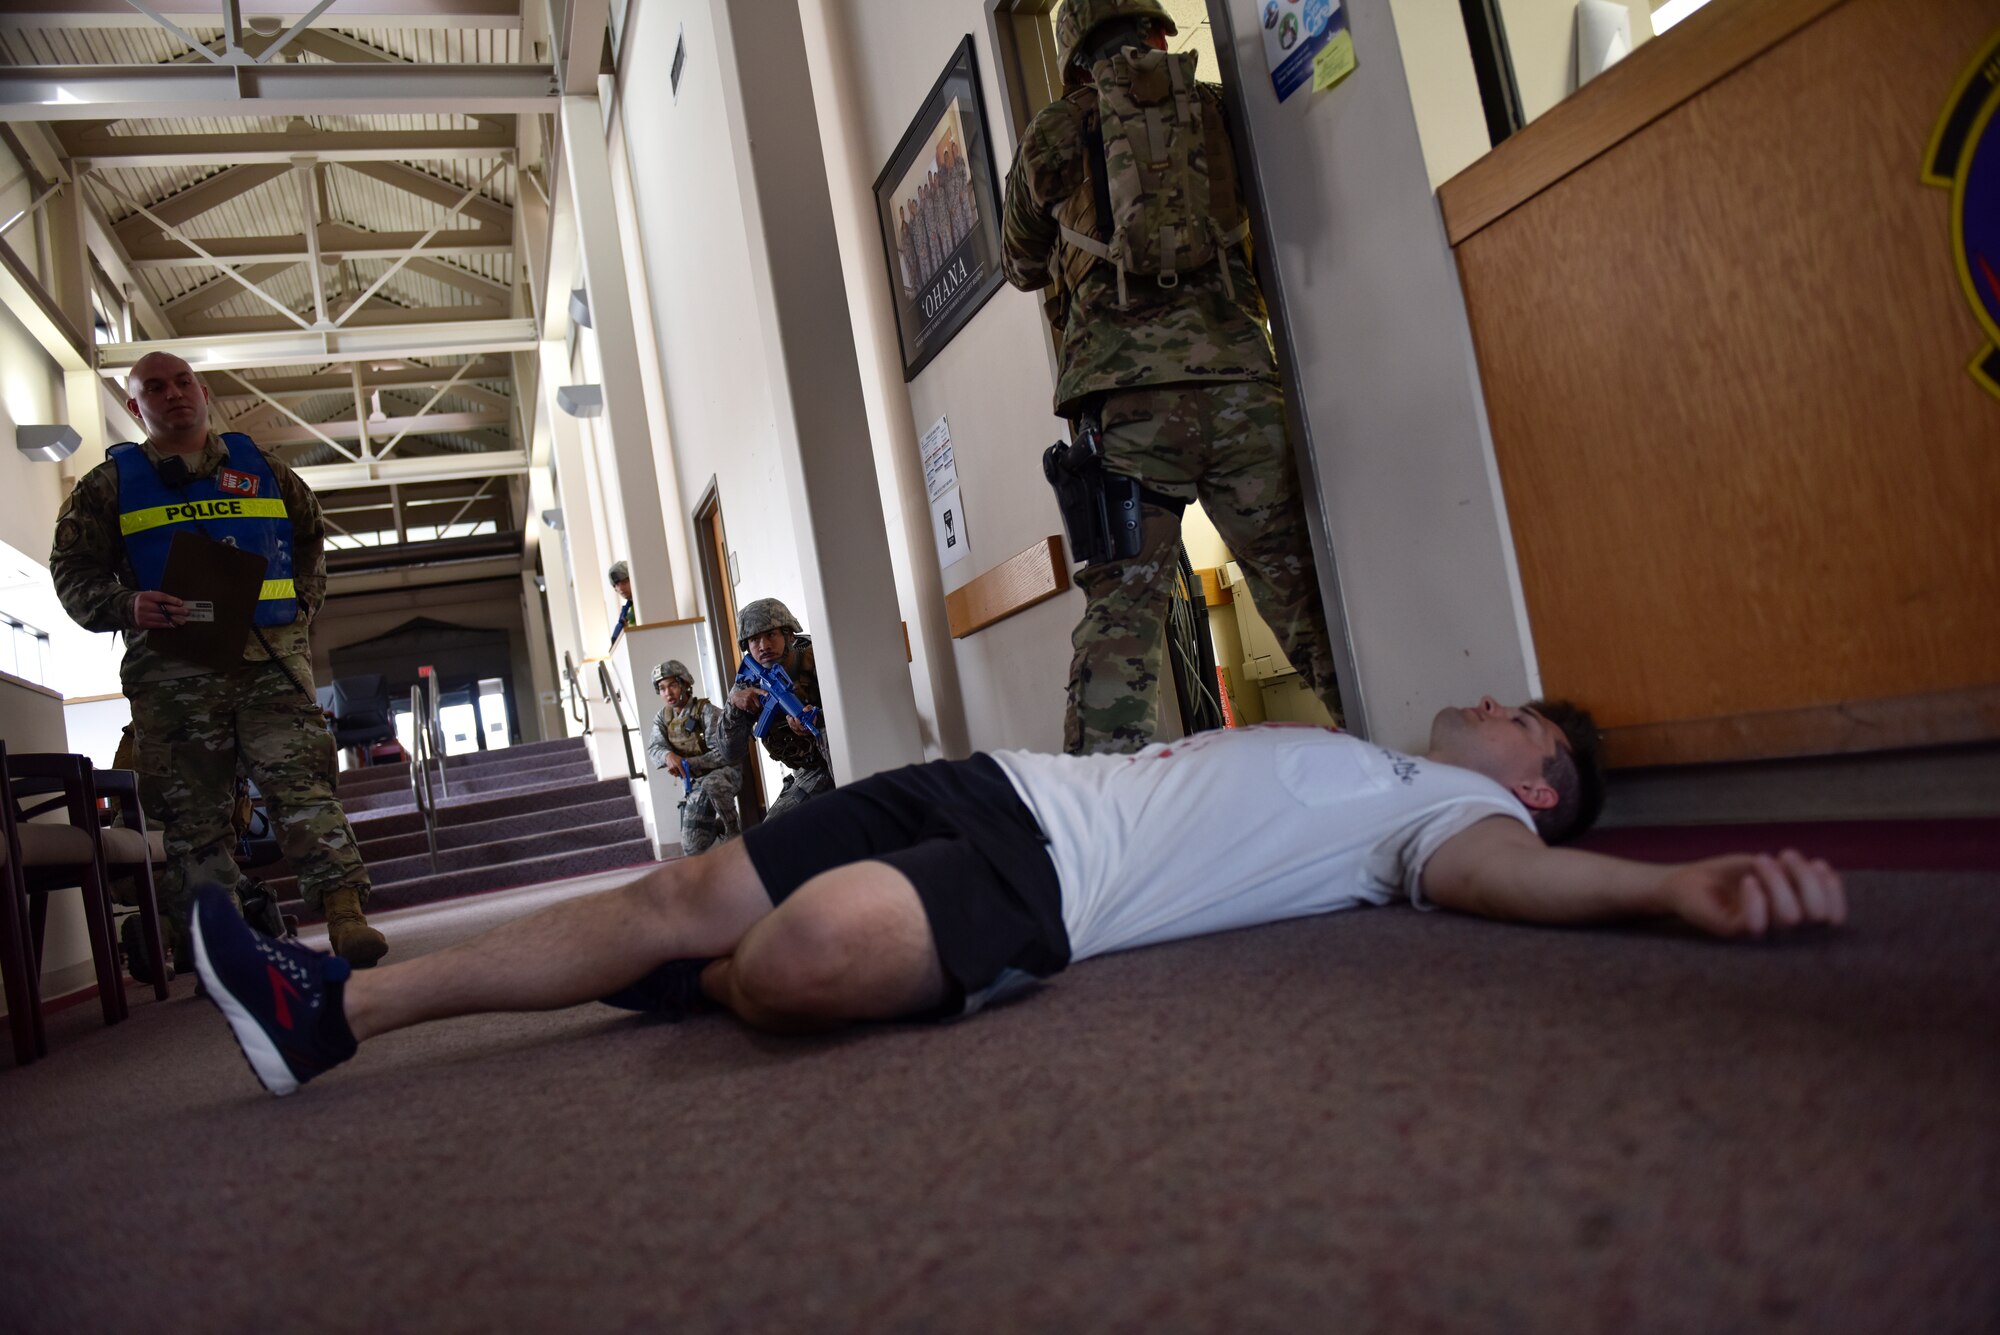 Laughlin personnel participated in an active shooter training at Laughlin Air Force Base, Texas, July 22, 2019. The exercise, aimed at bolstering crisis readiness and response capabilities, simulated a hostage situation that lasted for nearly two hours. (U.S. Air Force photo by Staff Sgt. Benjamin N. Valmoja)